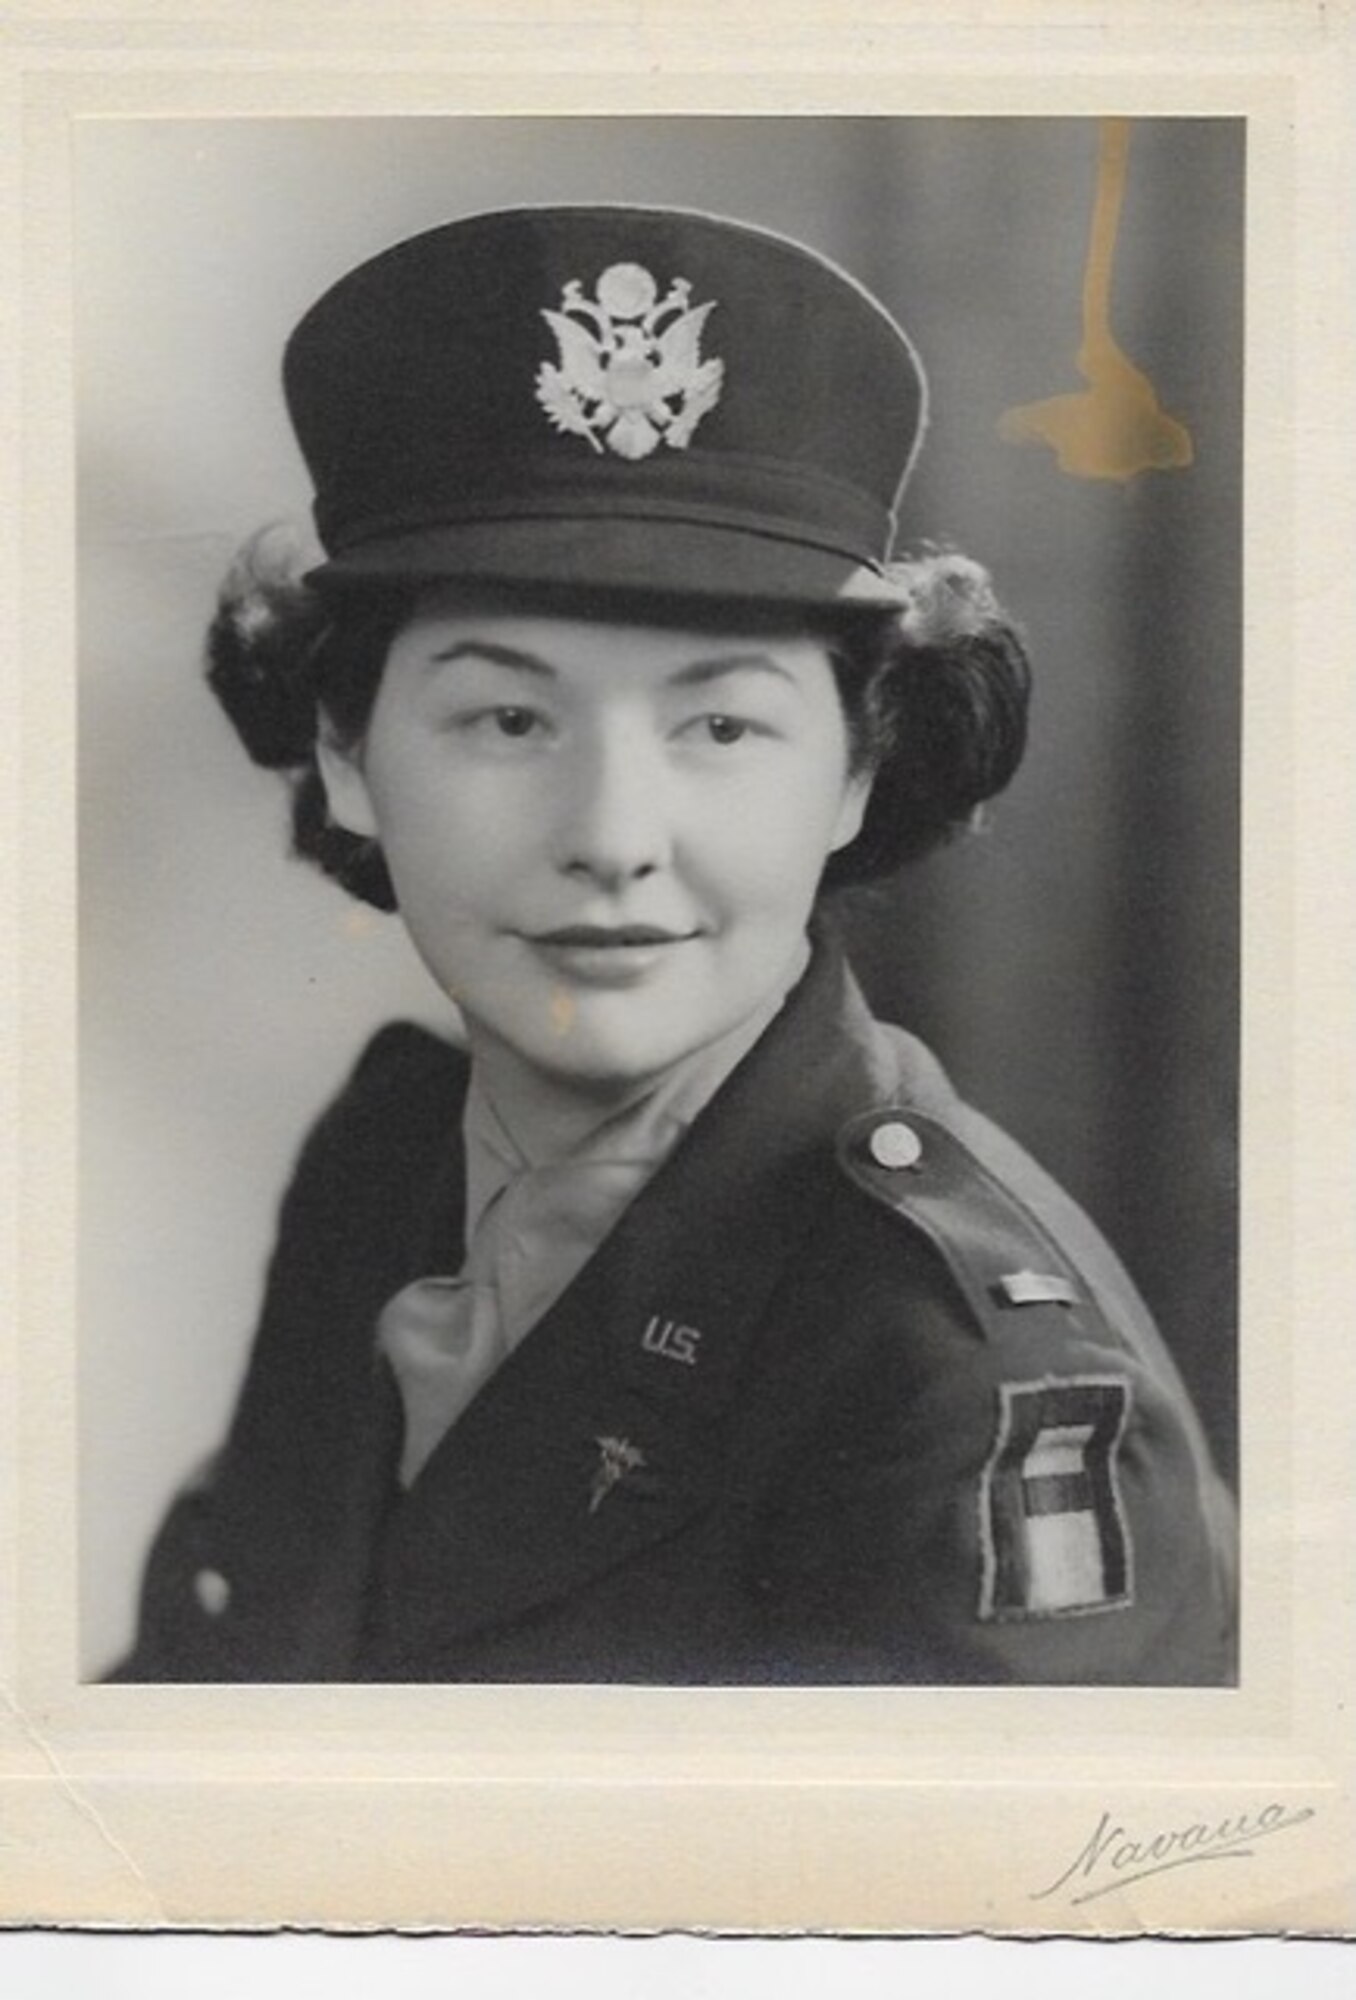 Retired U.S. Air Force Lt. Col. Martha Cameron, a World War II nurse and veteran, poses for a picture in 1944 while she was as a 1st Lt. U.S.